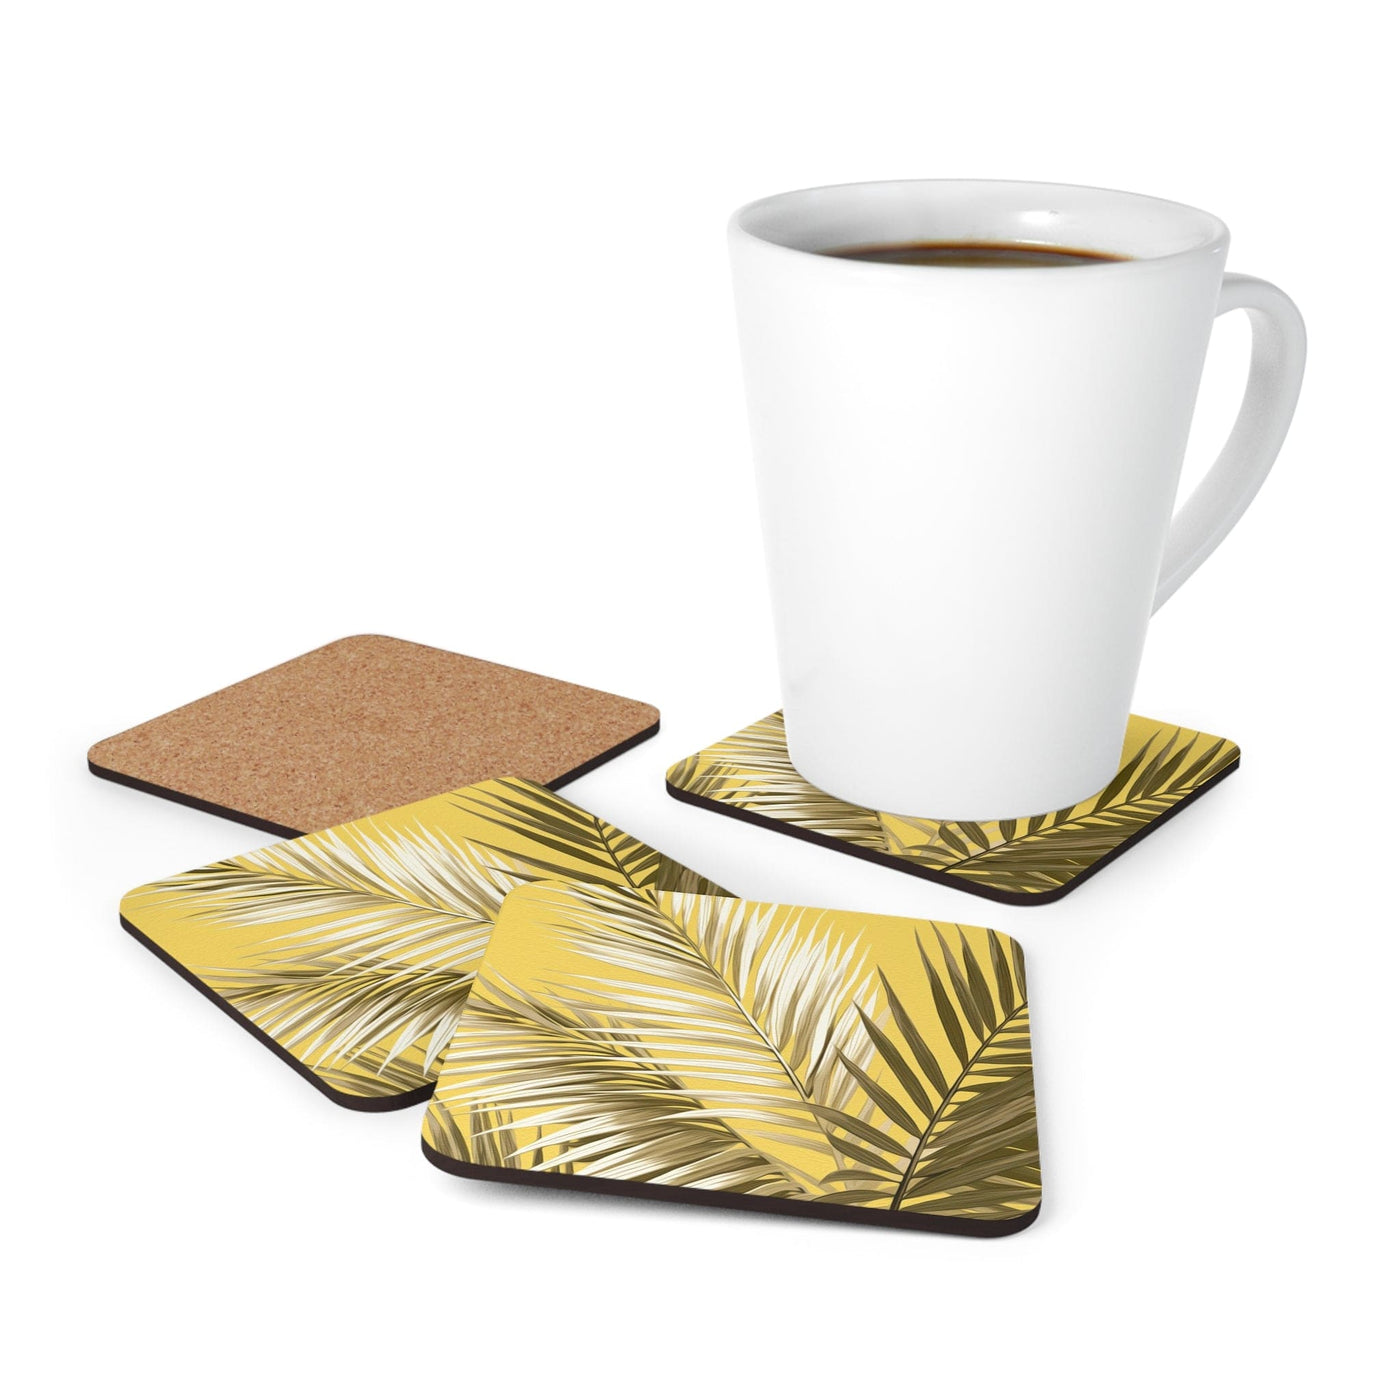 Coaster Set Of 4 For Drinks White Brown Palm Leaves - Decorative | Coasters